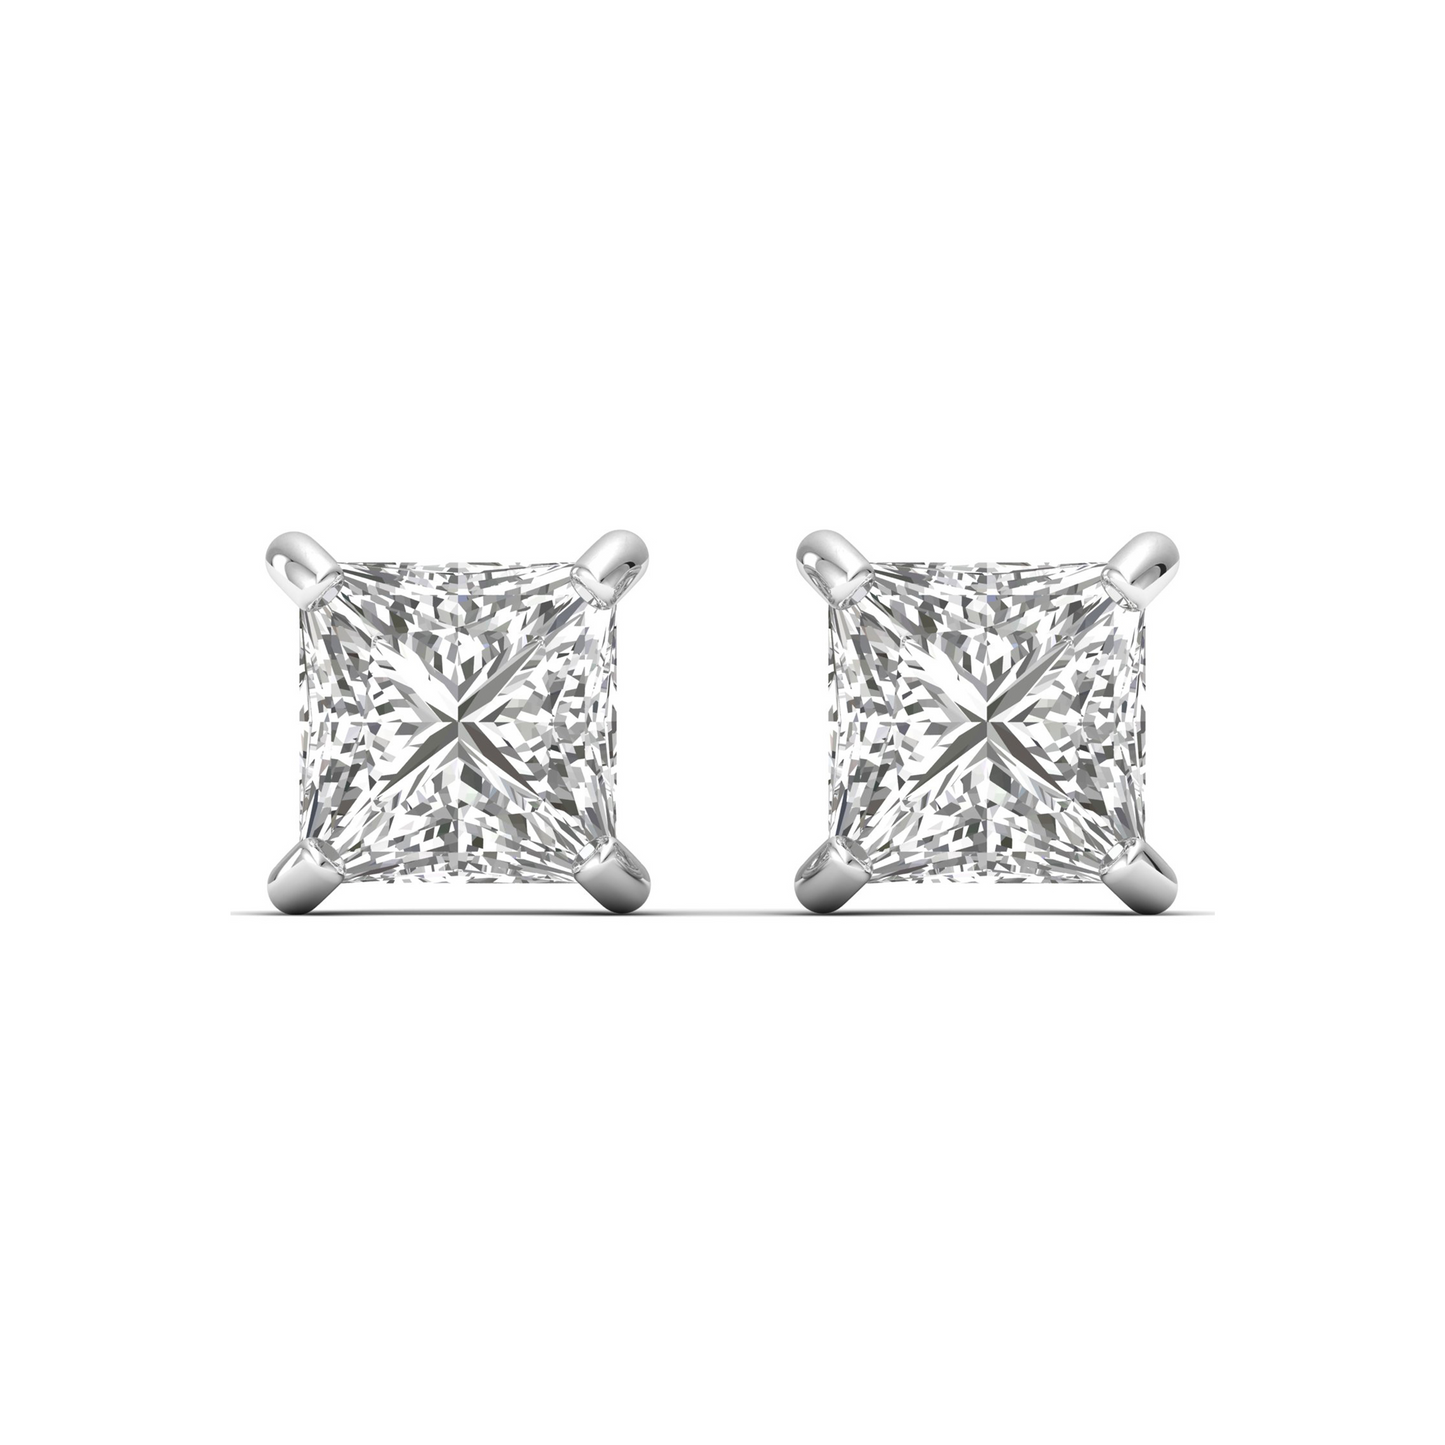 Regal Radiance: Adorn Yourself with Royalty in our Princess-Cut Diamond Earring